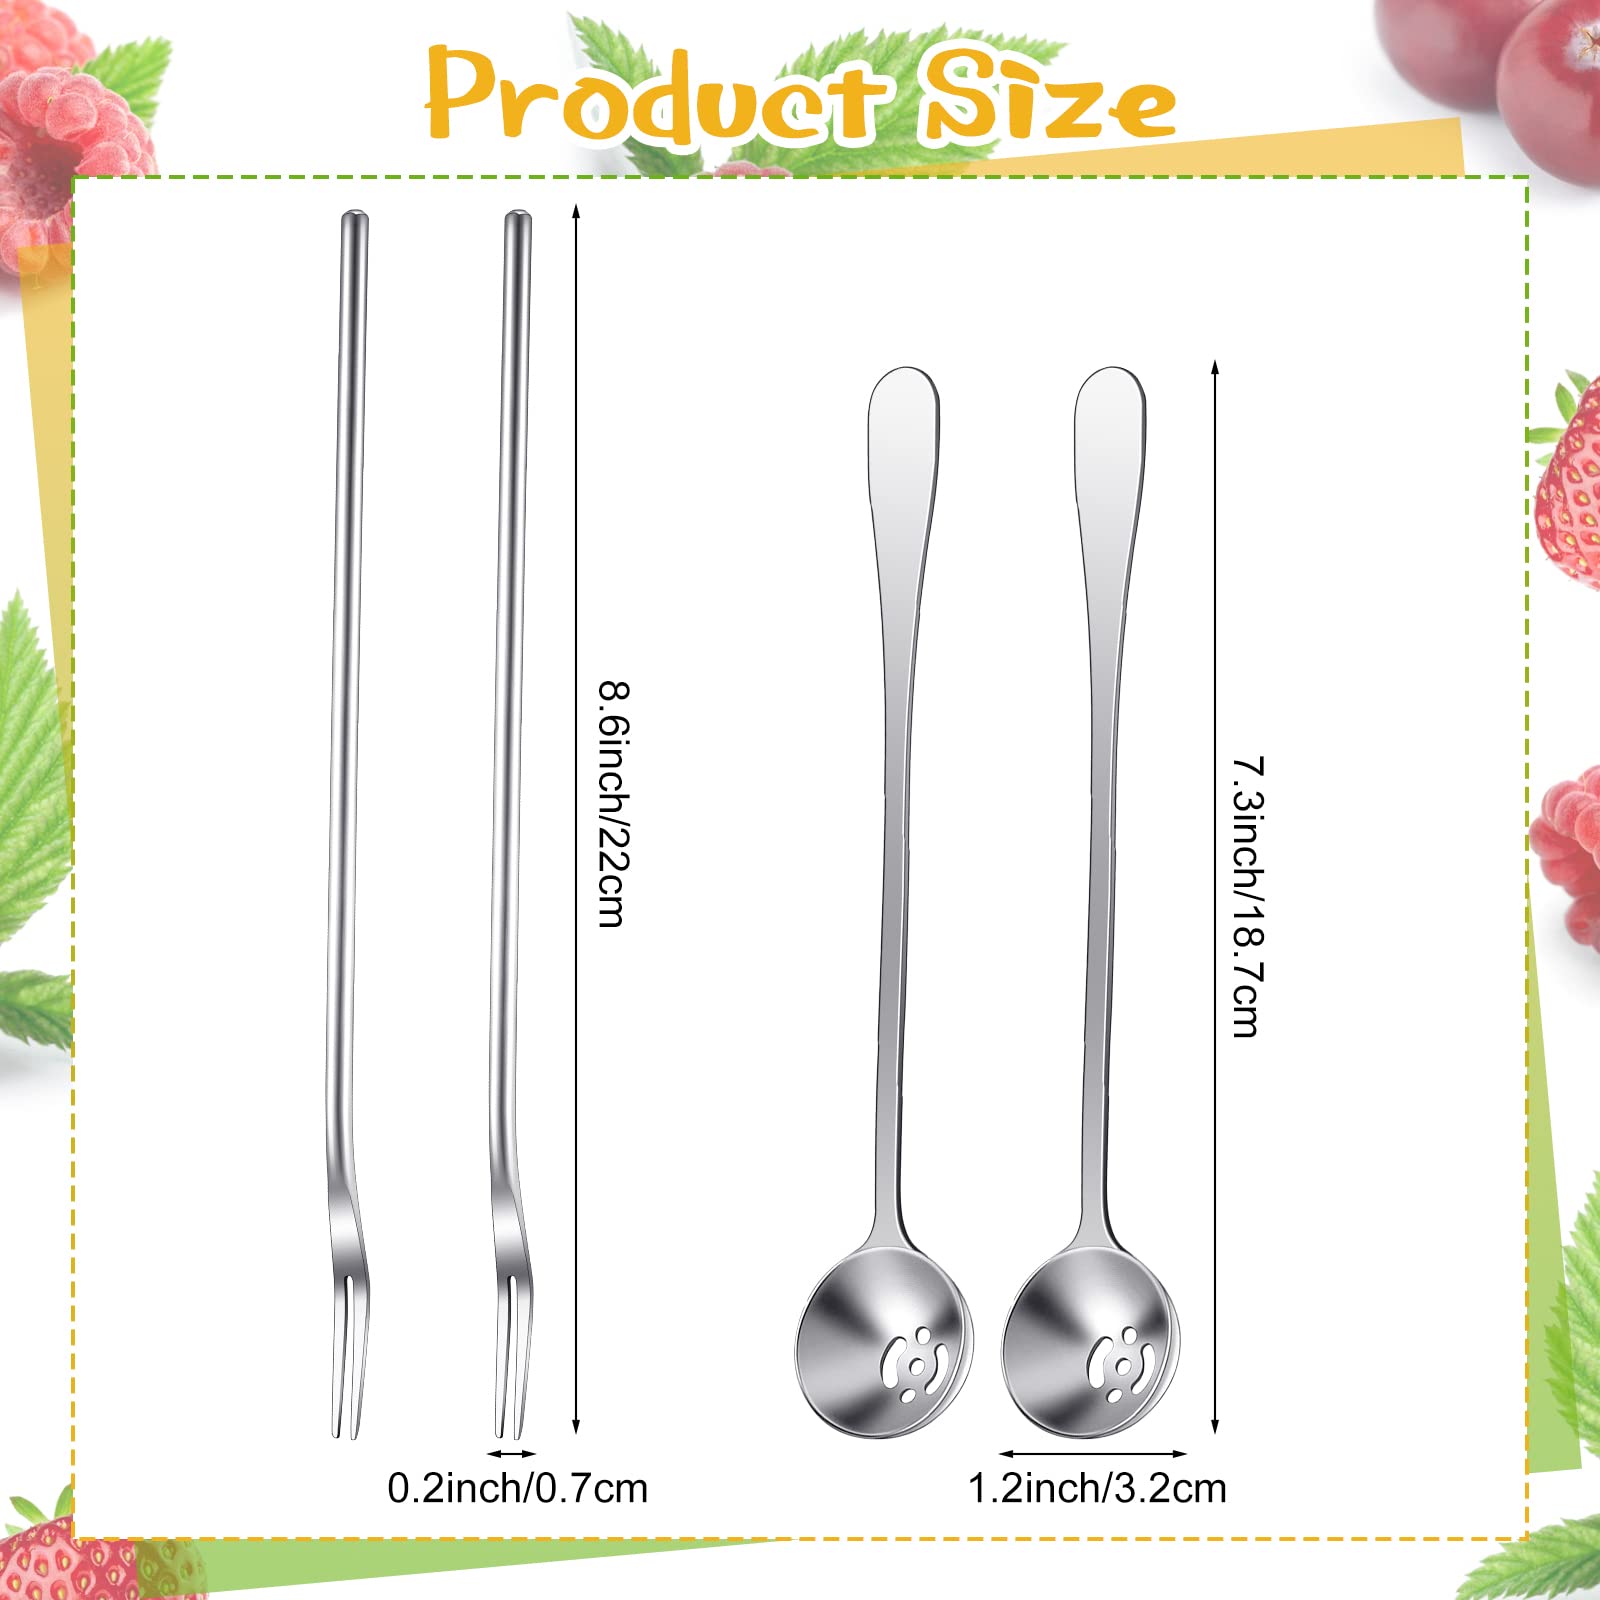 Didaey 4 Pcs 8.7 Inch Pickle Fork and Olive Spoon Strainer Set Stainless Steel Long Handle Pick Jar Serving Spoon with Drain Hole Spoon Prong for Onion Cucumber Arugula (Classic Style)